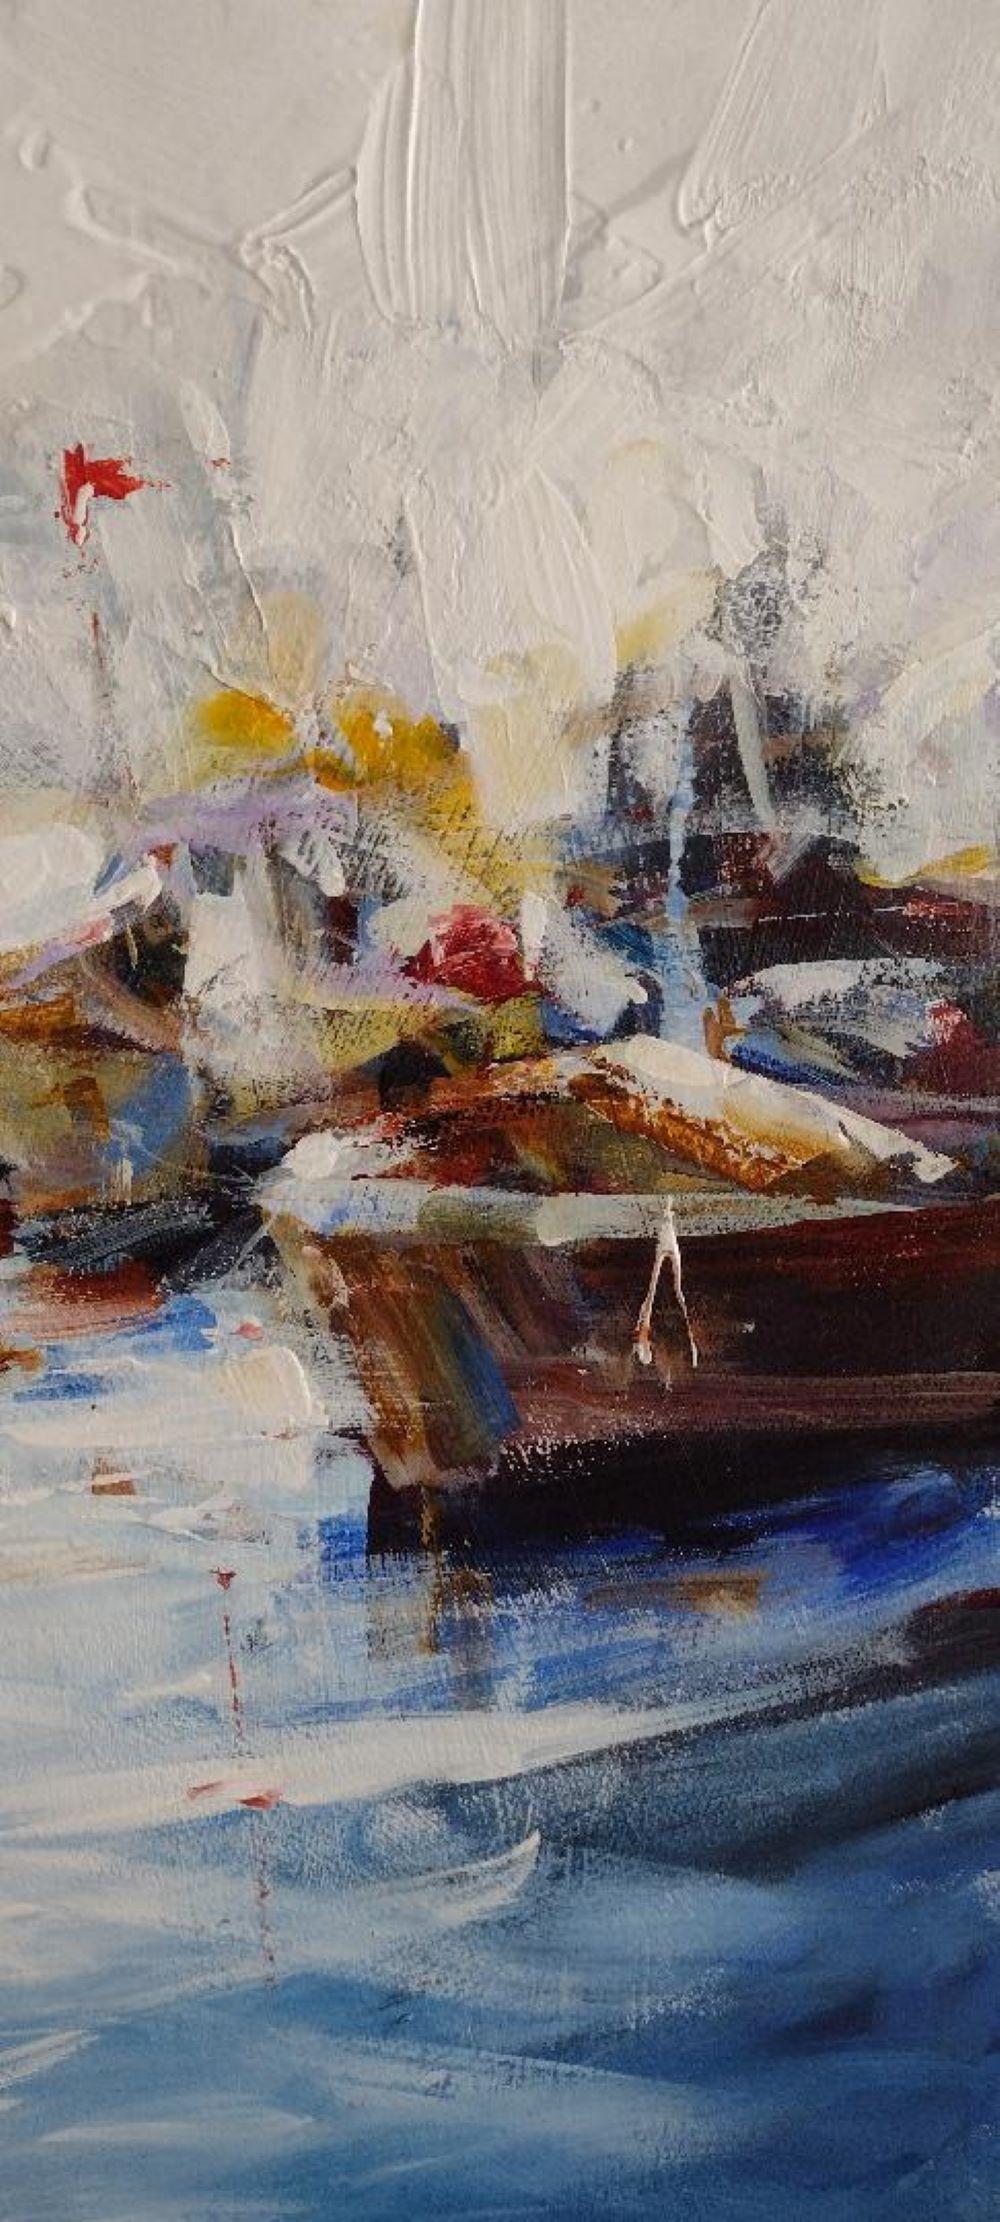 Spontaneous and lyrical with sunlight shimmering on the surface of the rich blue water. Impressions of boats gently bobbing in the calm waters.
Artist Bio:
Born in 1980, artist Torabi believes he was born an artist. As a child, viewing a beautiful